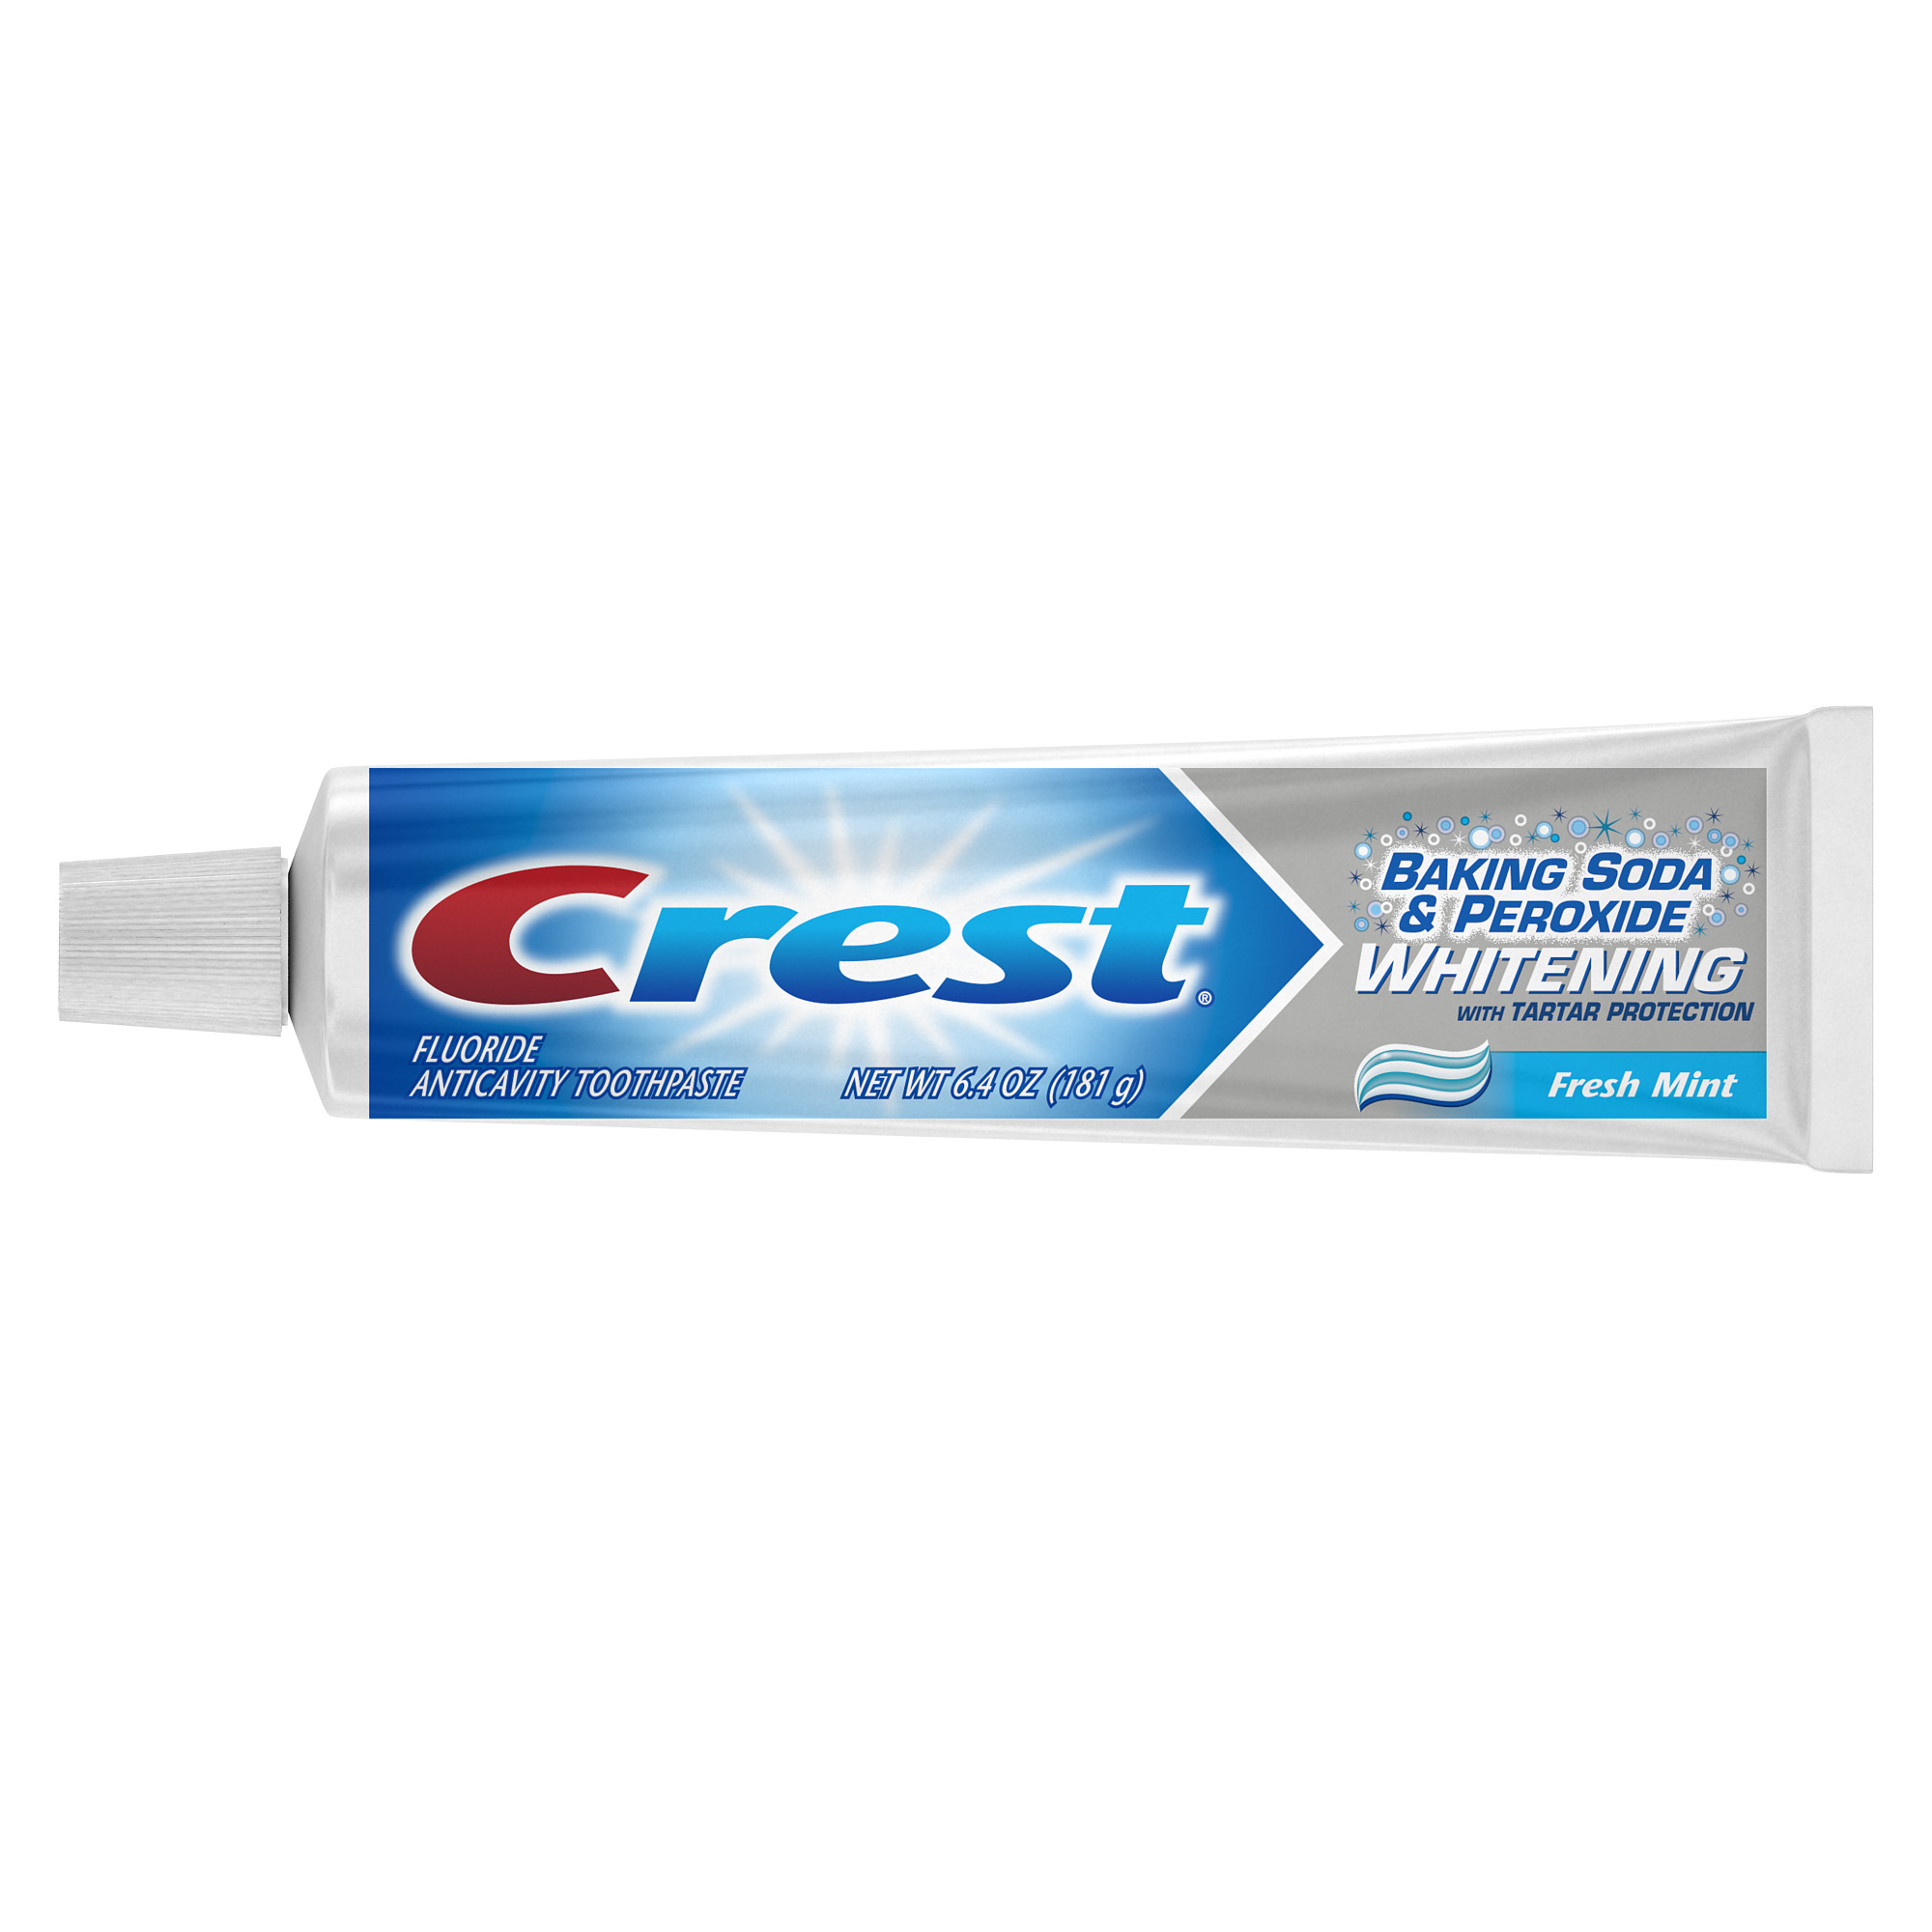 Crest Baking Soda & Peroxide Whitening with Tartar Protection Toothpaste, Fresh Mint, 6.4 oz., Pack of 2 - image 3 of 3